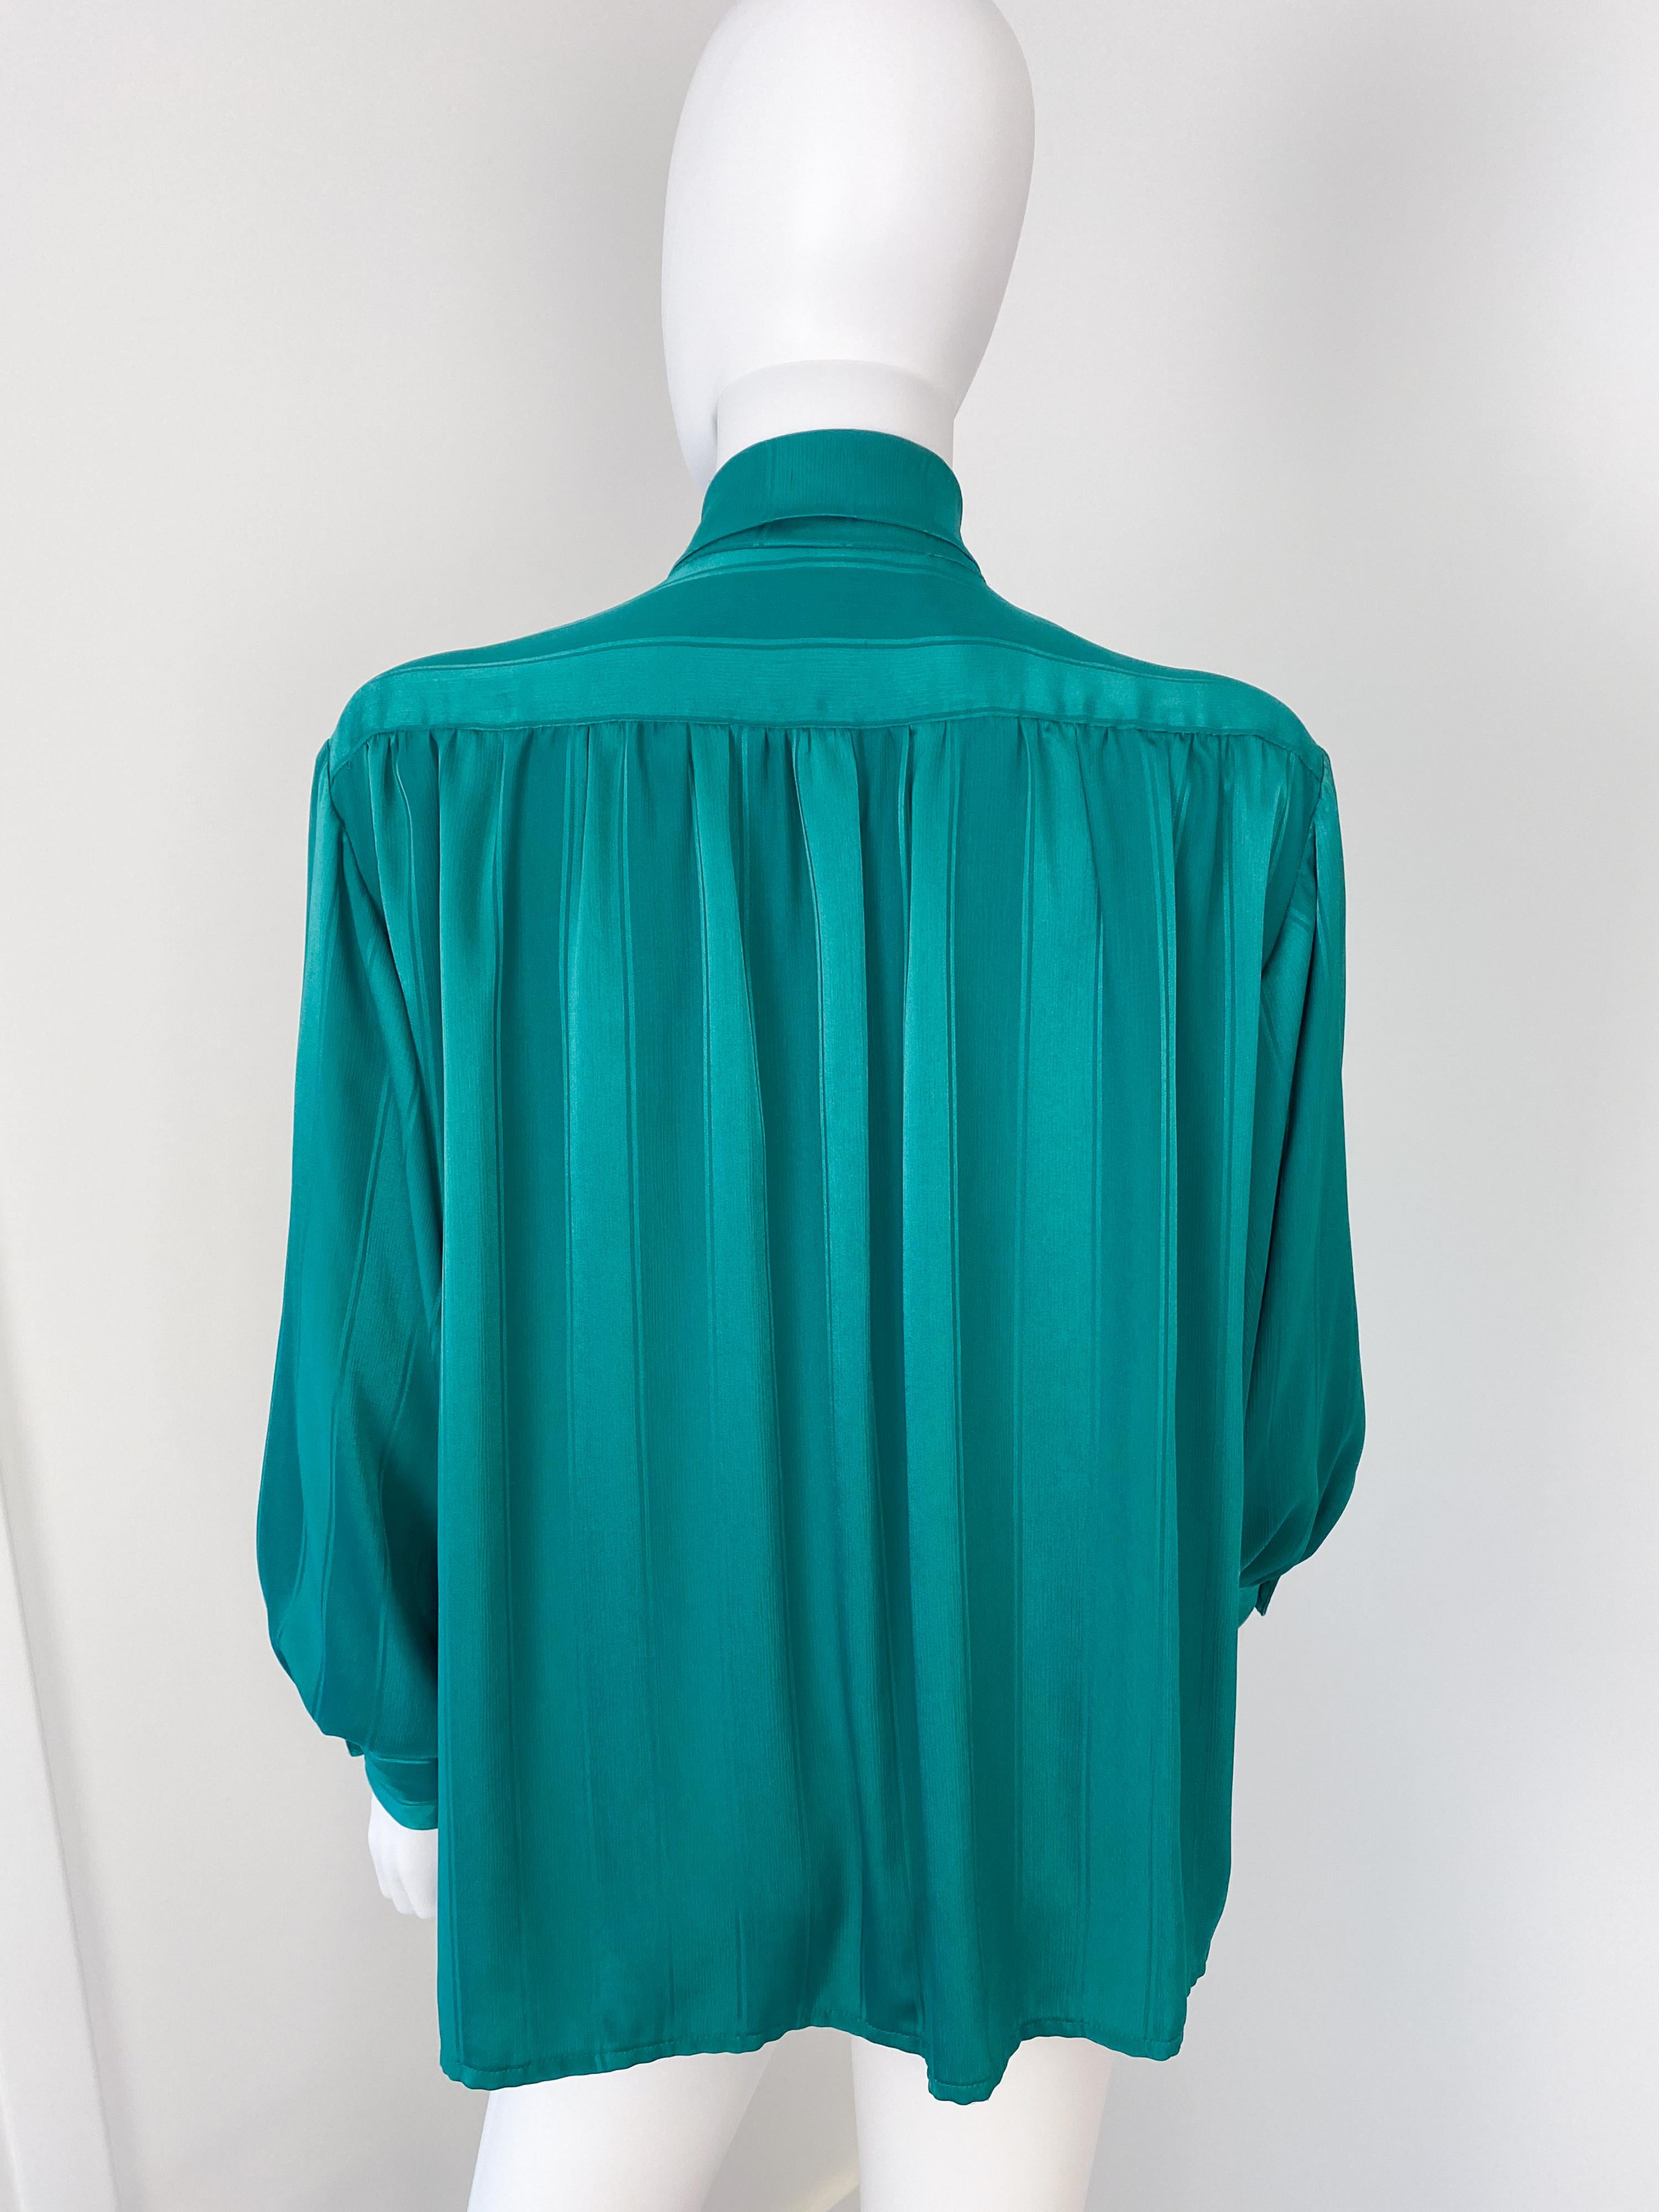 Vintage 1980s Silky Polyester Bow Blouse Top Emerald Green Stripes Size 12/14 For Sale 7